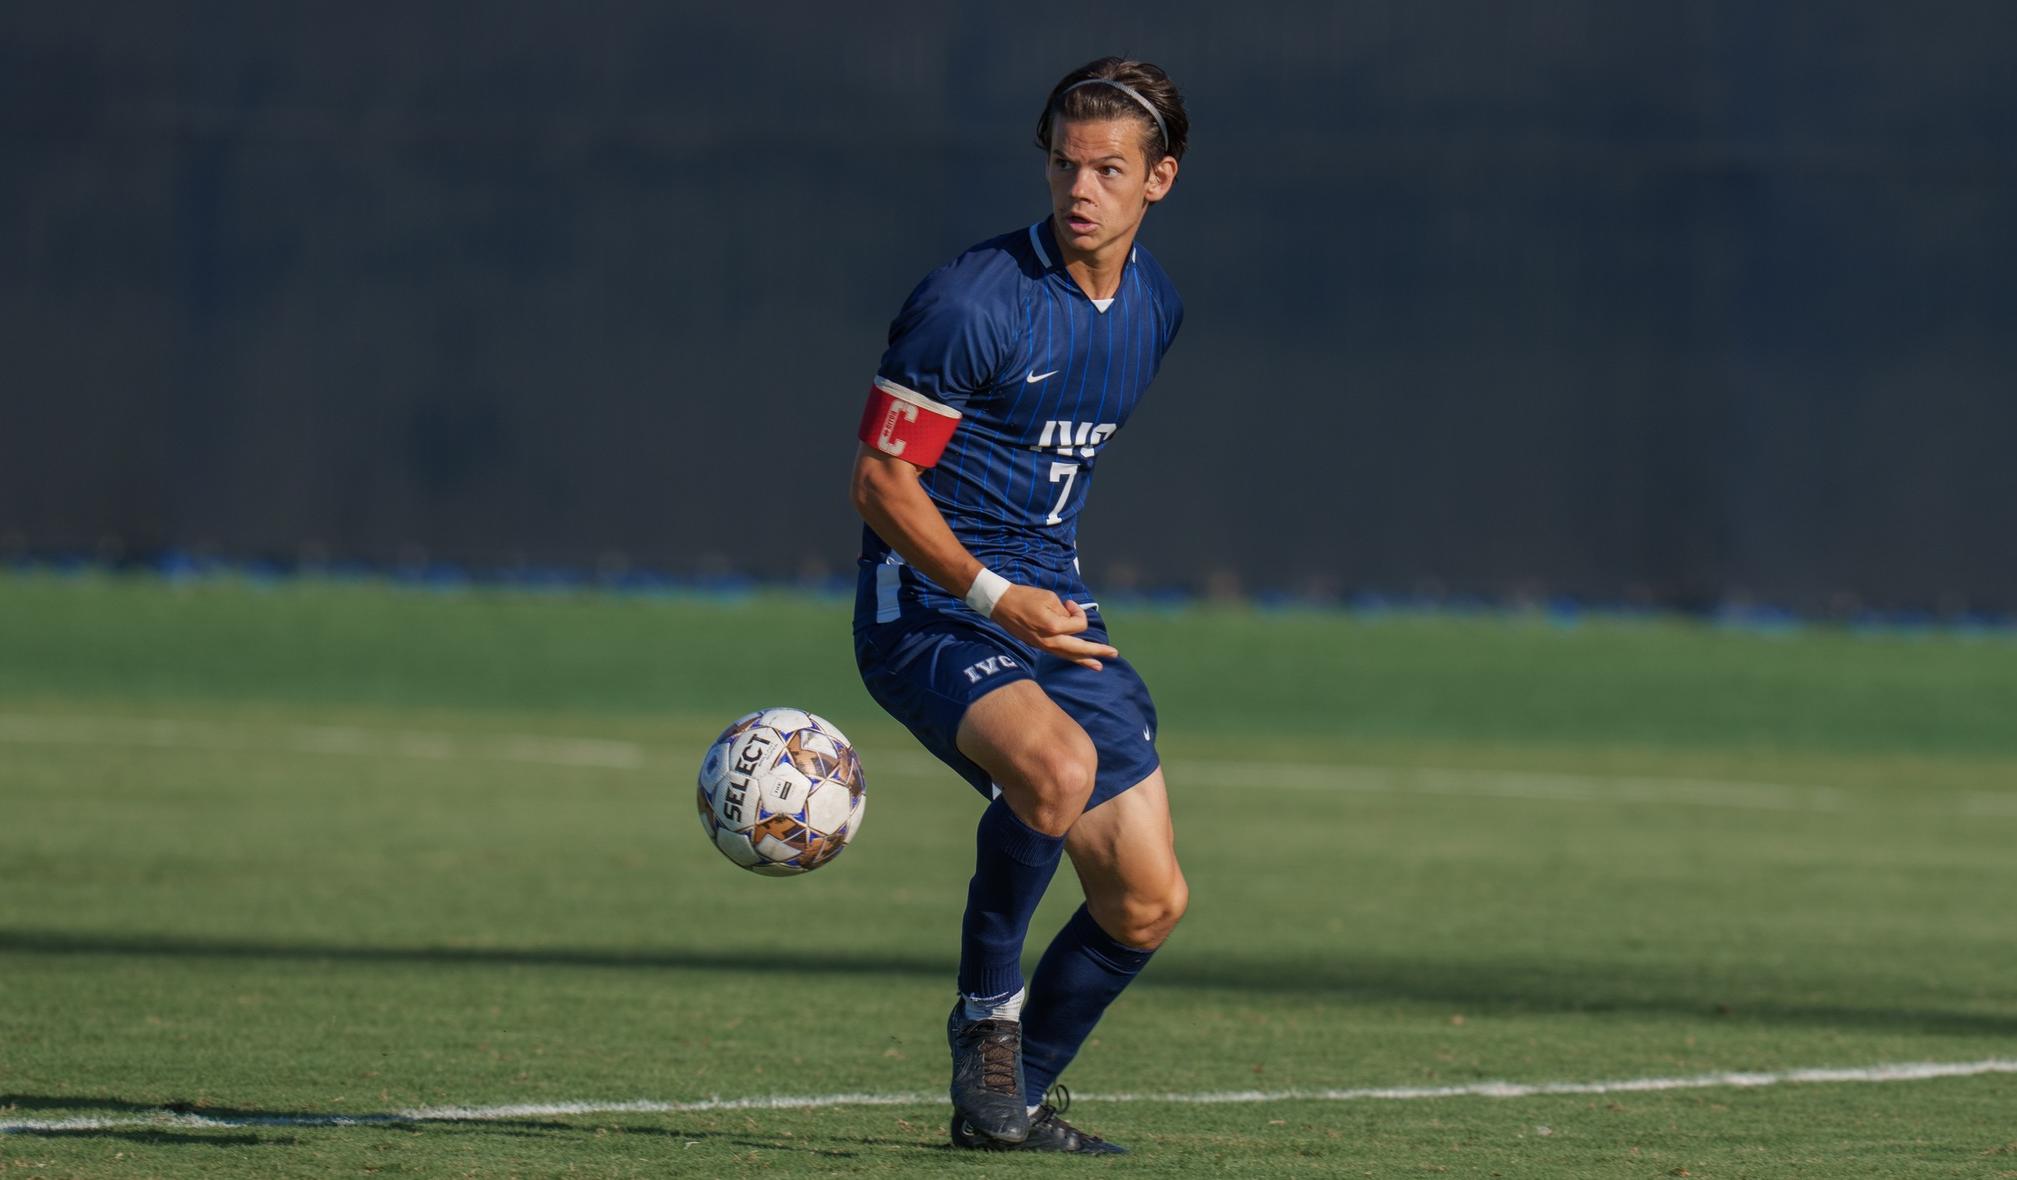 Grant Miller finishes to lift men's soccer to win on the road